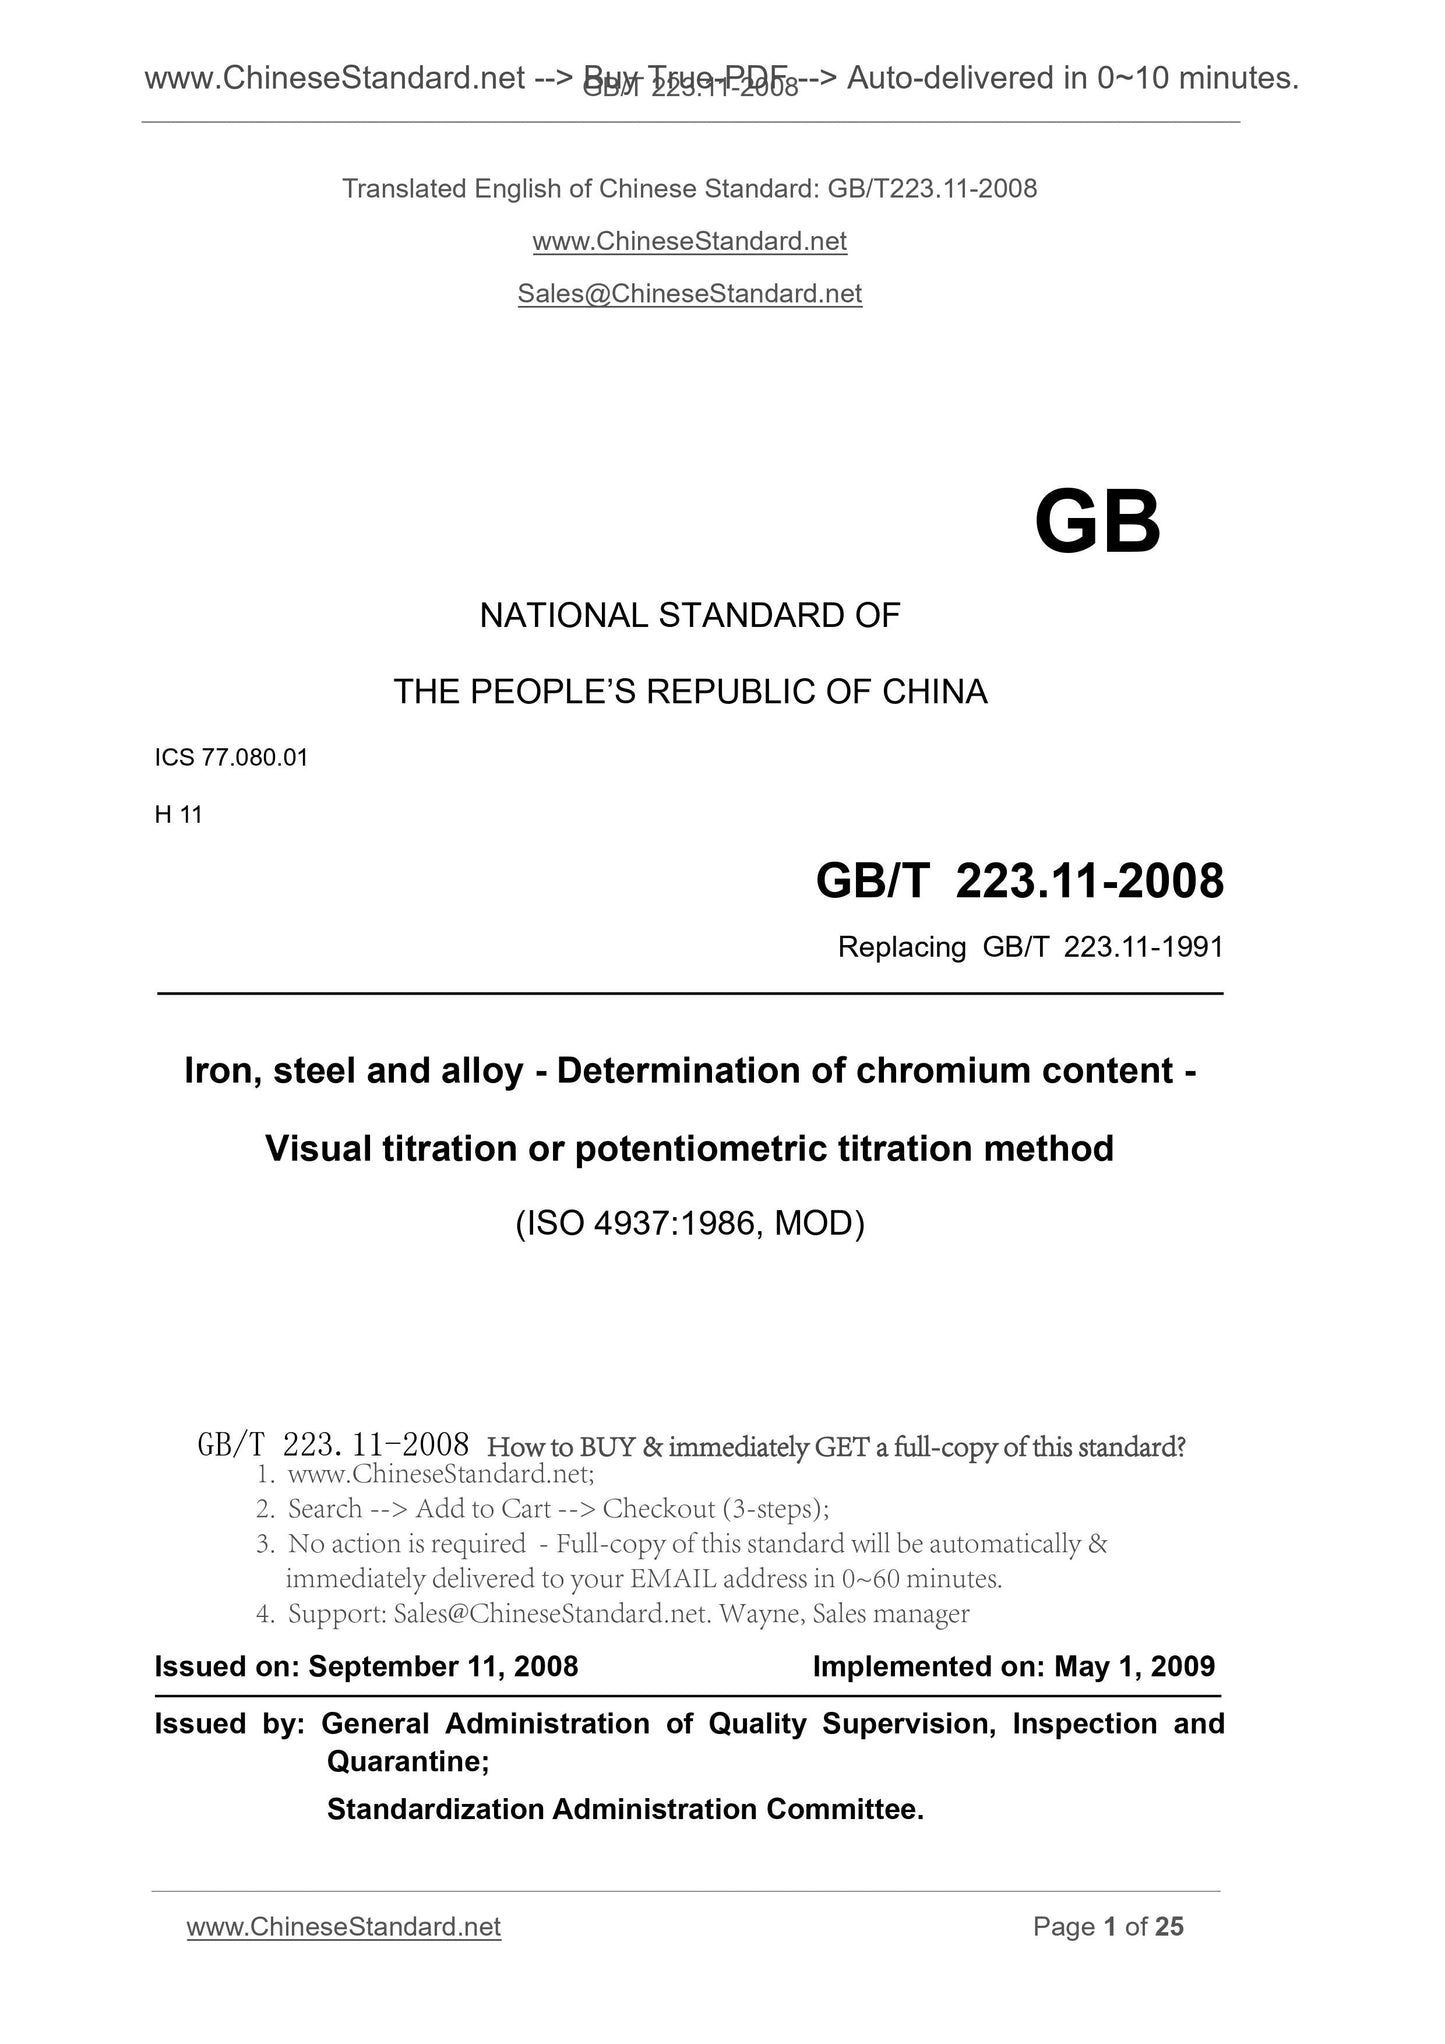 GB/T 223.11-2008 Page 1